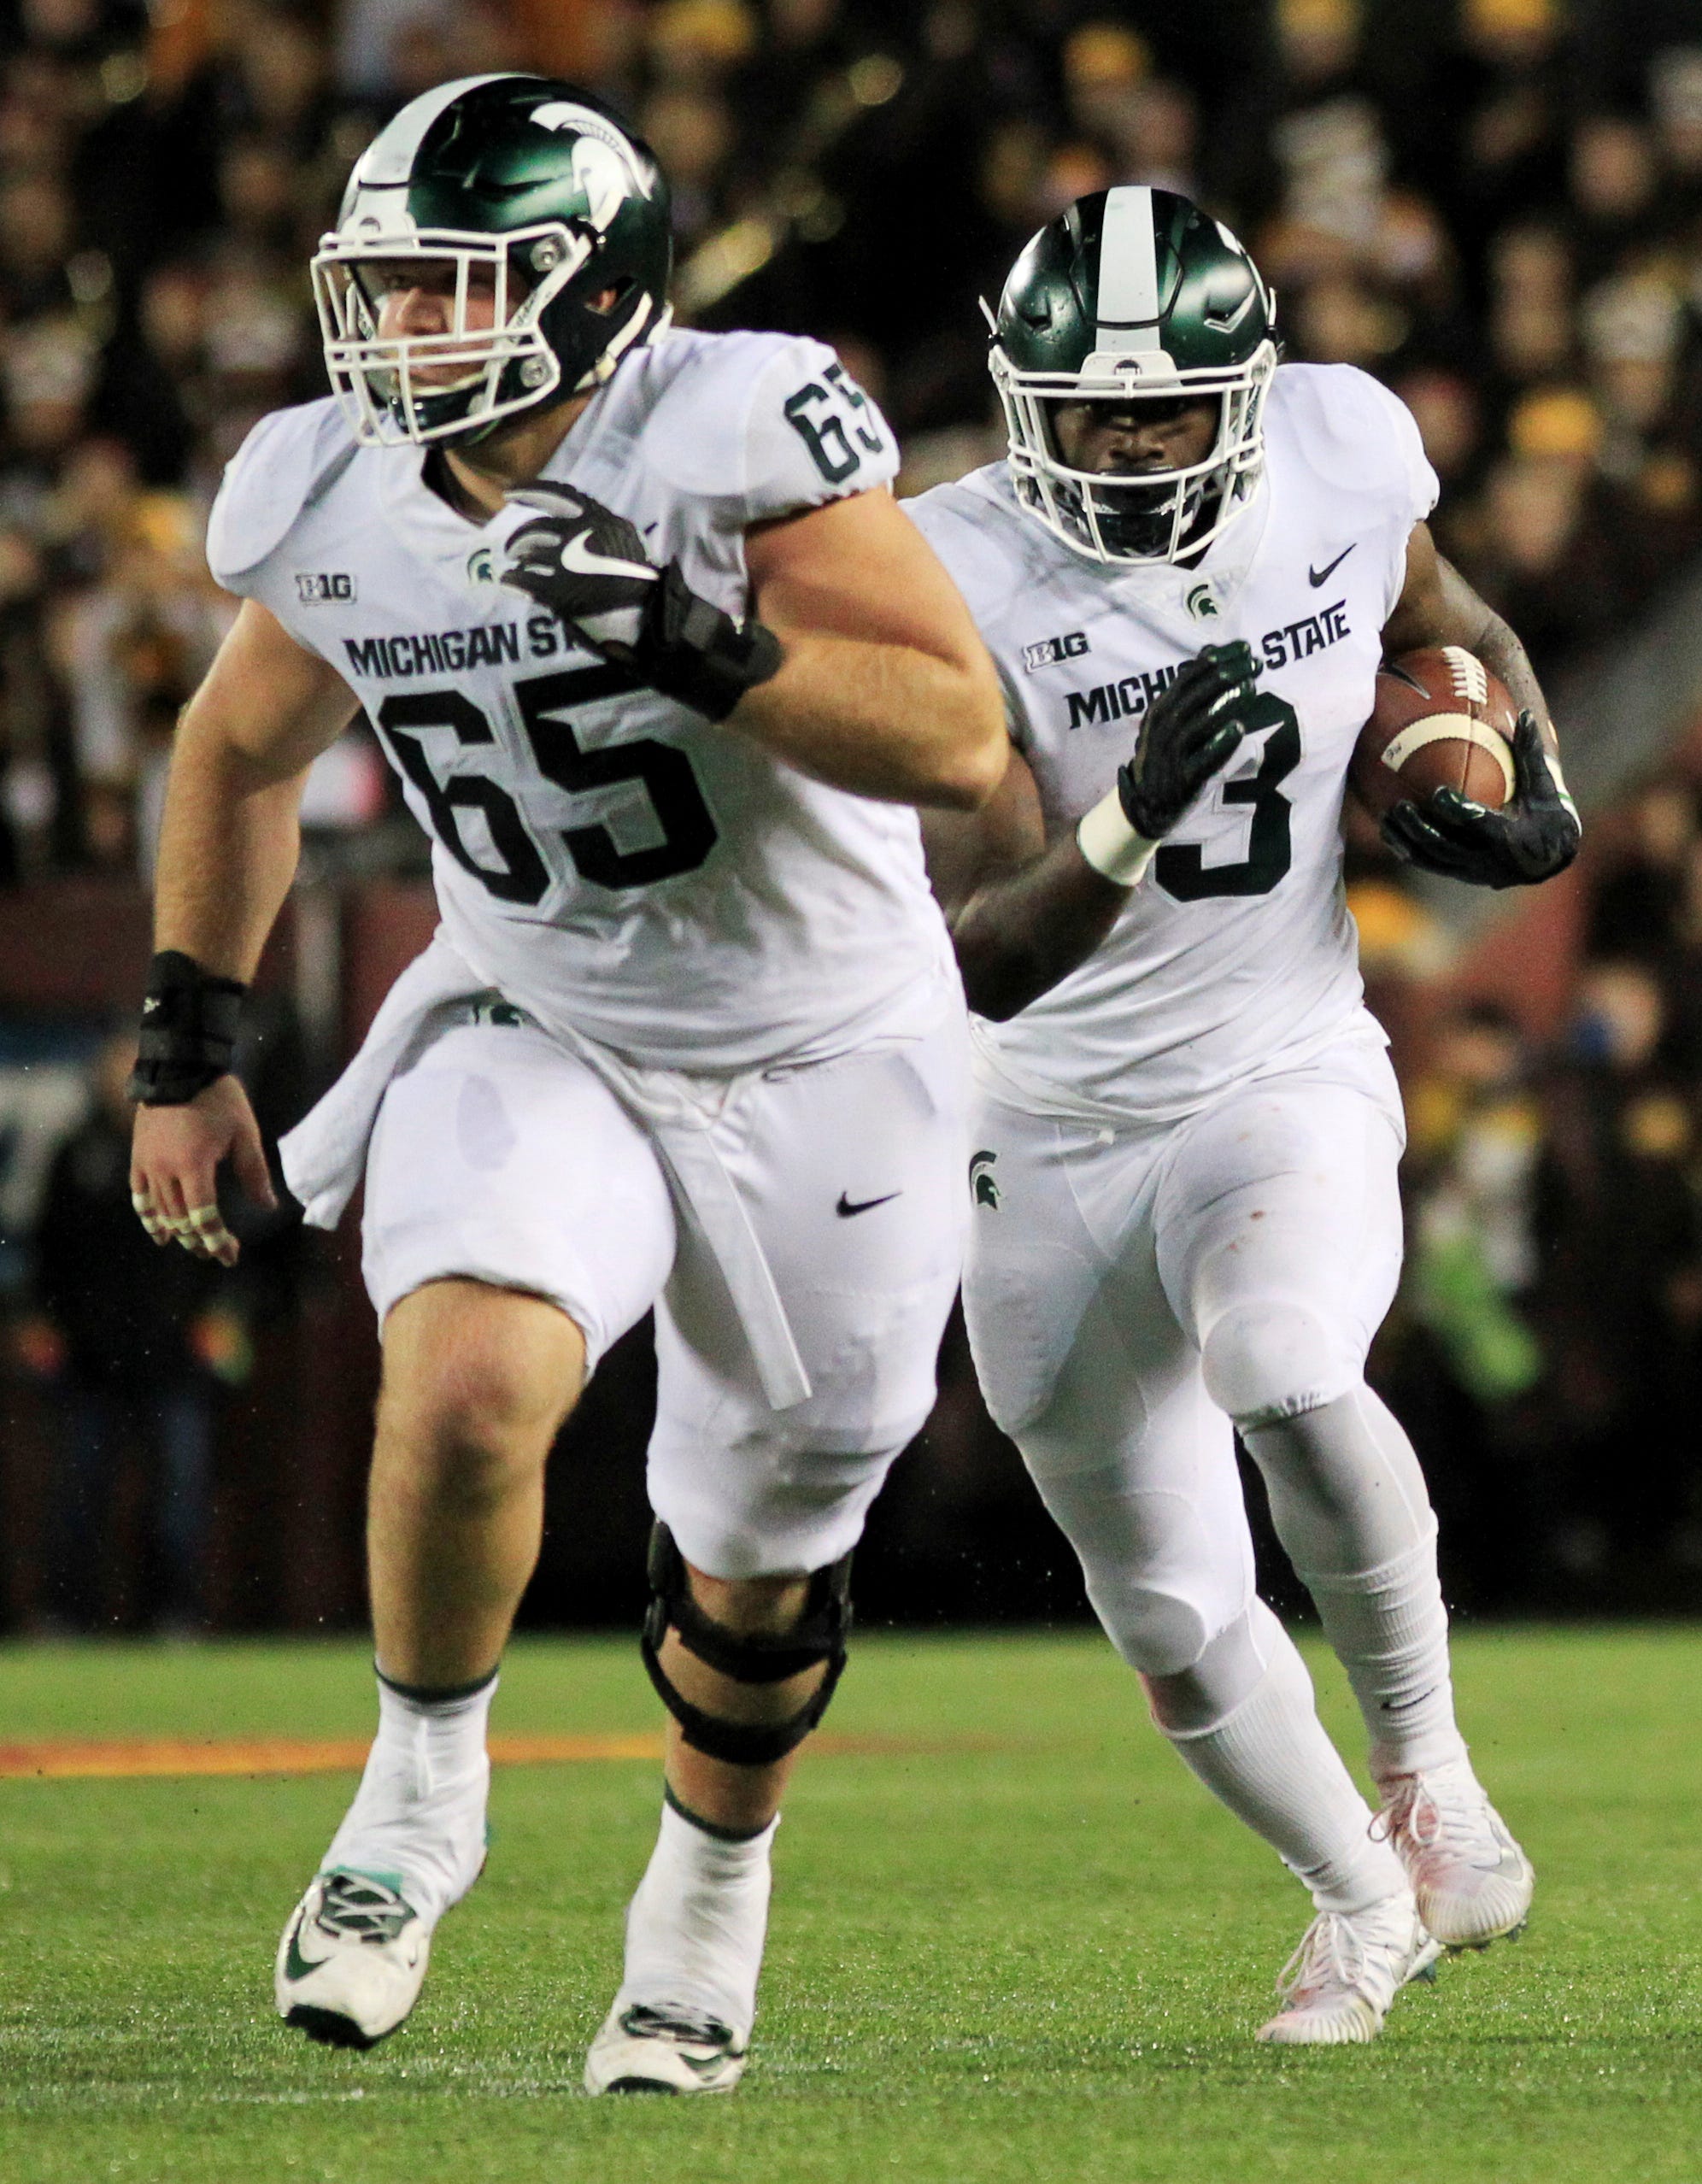 OFFENSIVE LINE – Brian Allen, 2014-17: Allen played in 51 career games with 38 starts, including 17 at center, 16 at left guard and five at right guard. A team captain as a senior in 2017, Allen earned second-team All-Big Ten honors for the third straight season while starting all 13 games at center and leading Michigan State to 10 victories just a year after suffering through a 3-9 tumble in 2016.